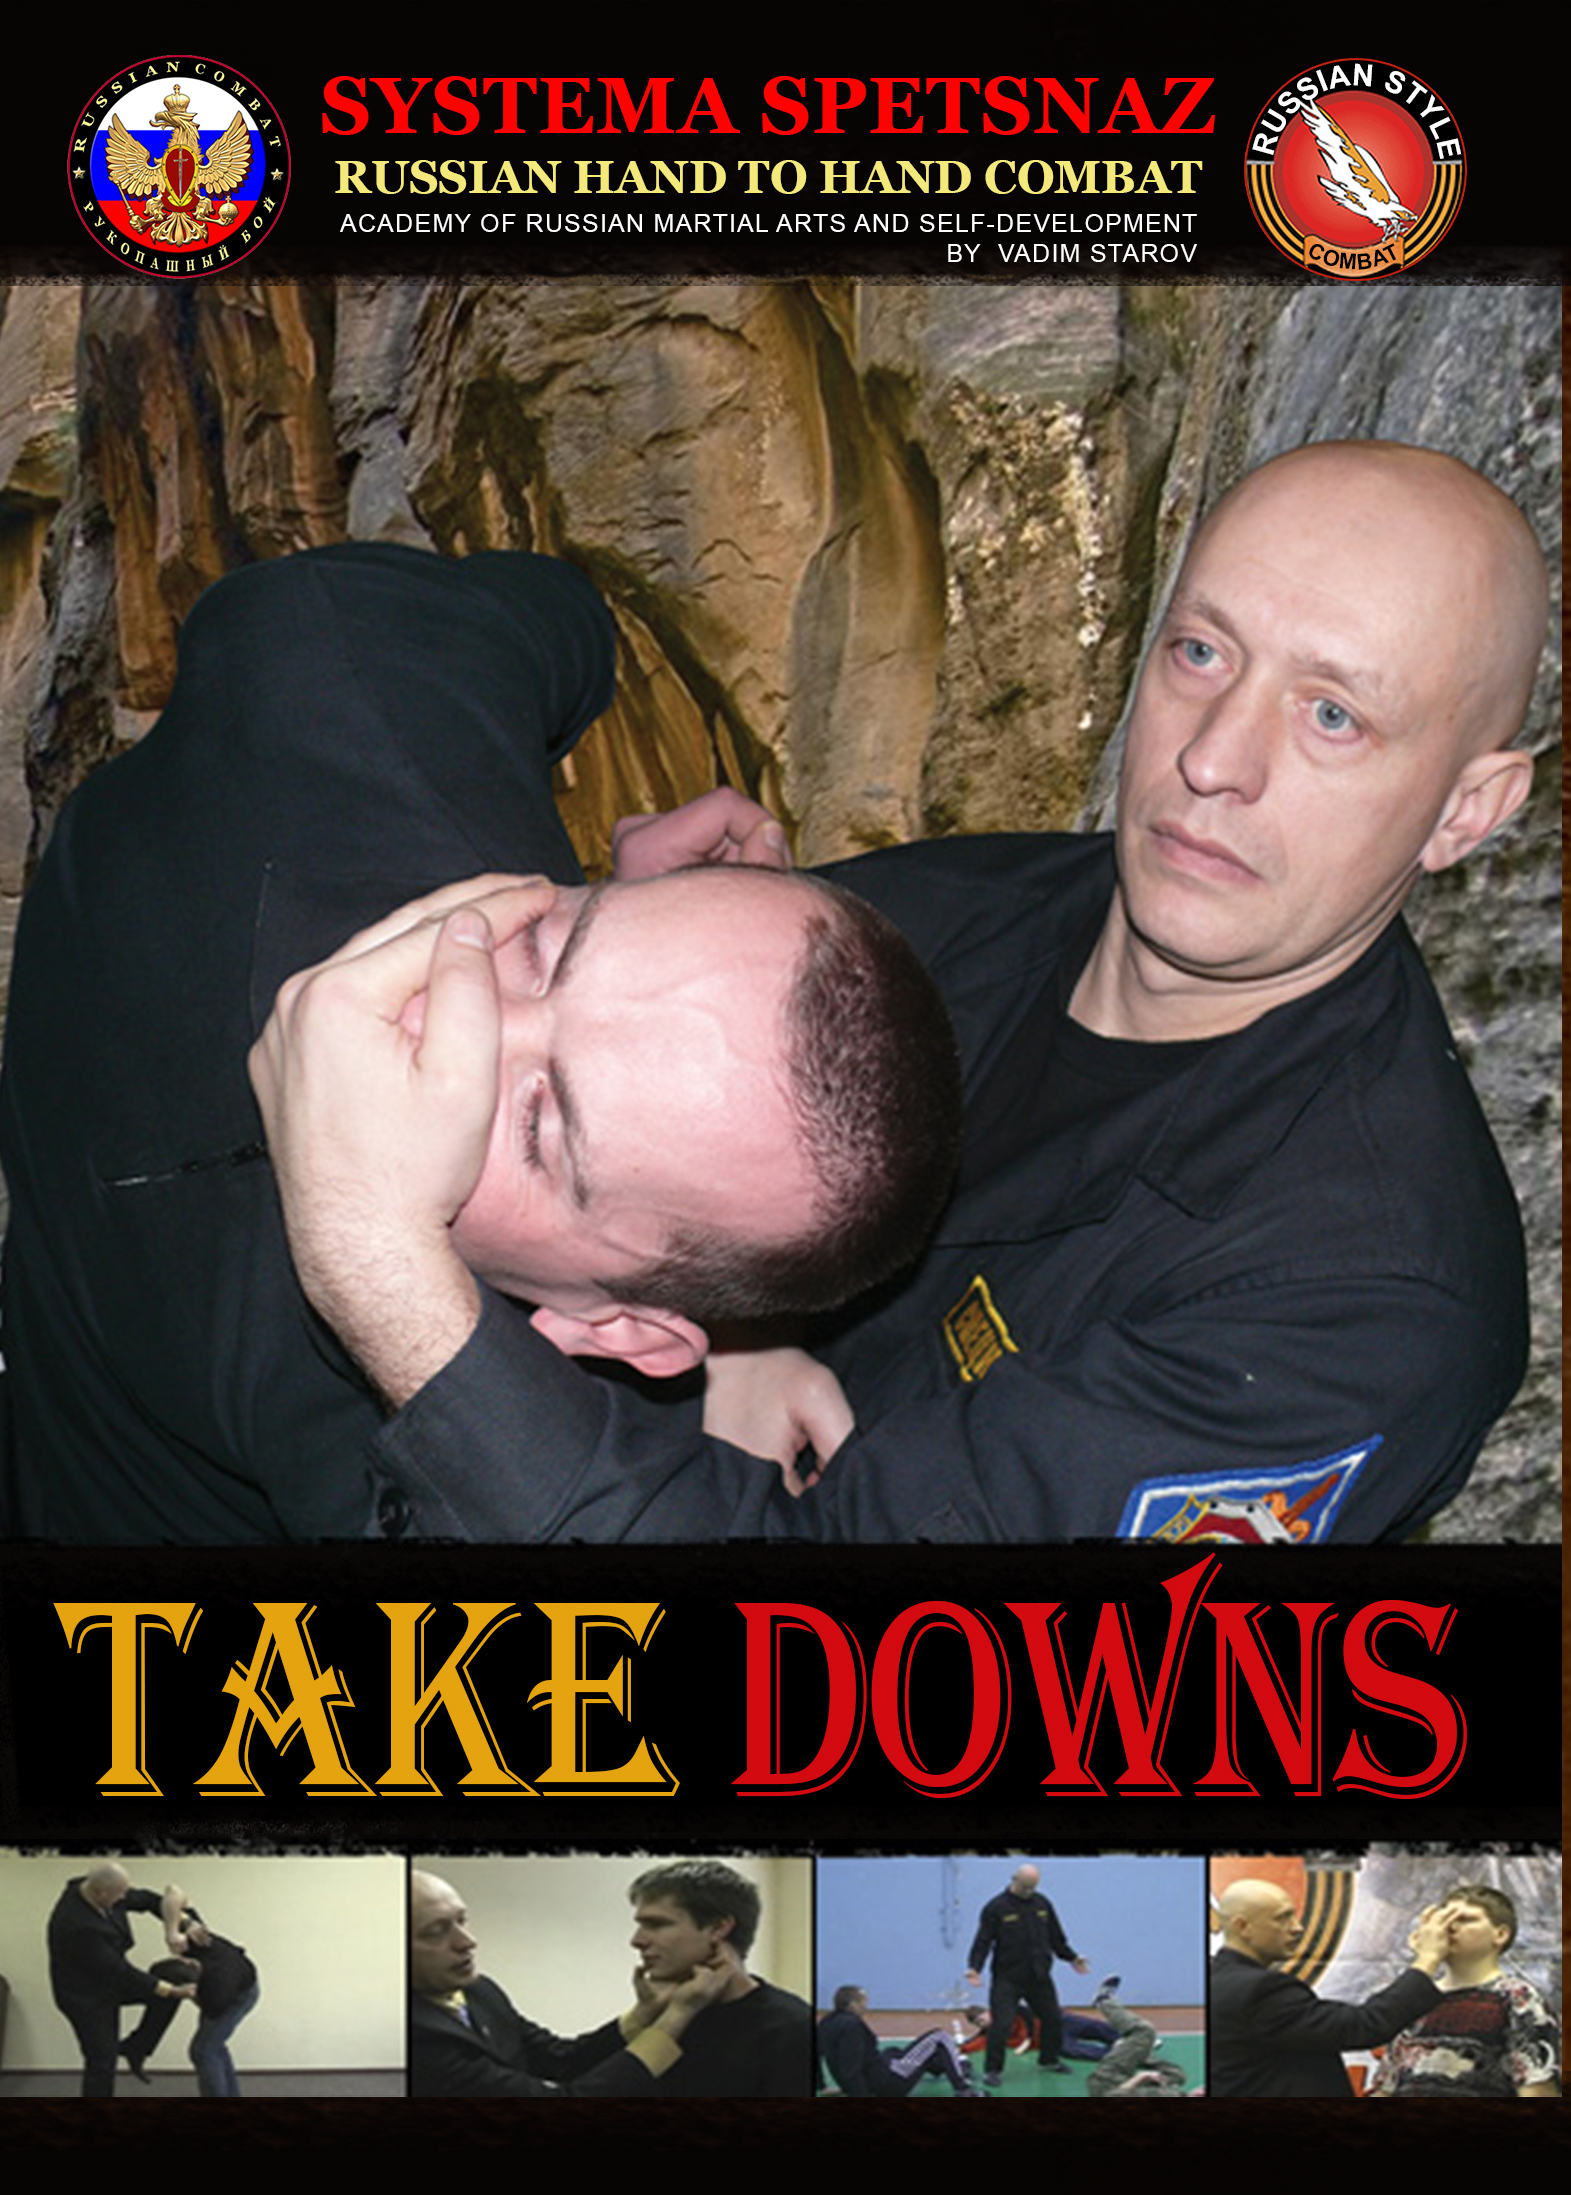 Systema Spetsnaz DVD #8 - Takedowns - Click Image to Close